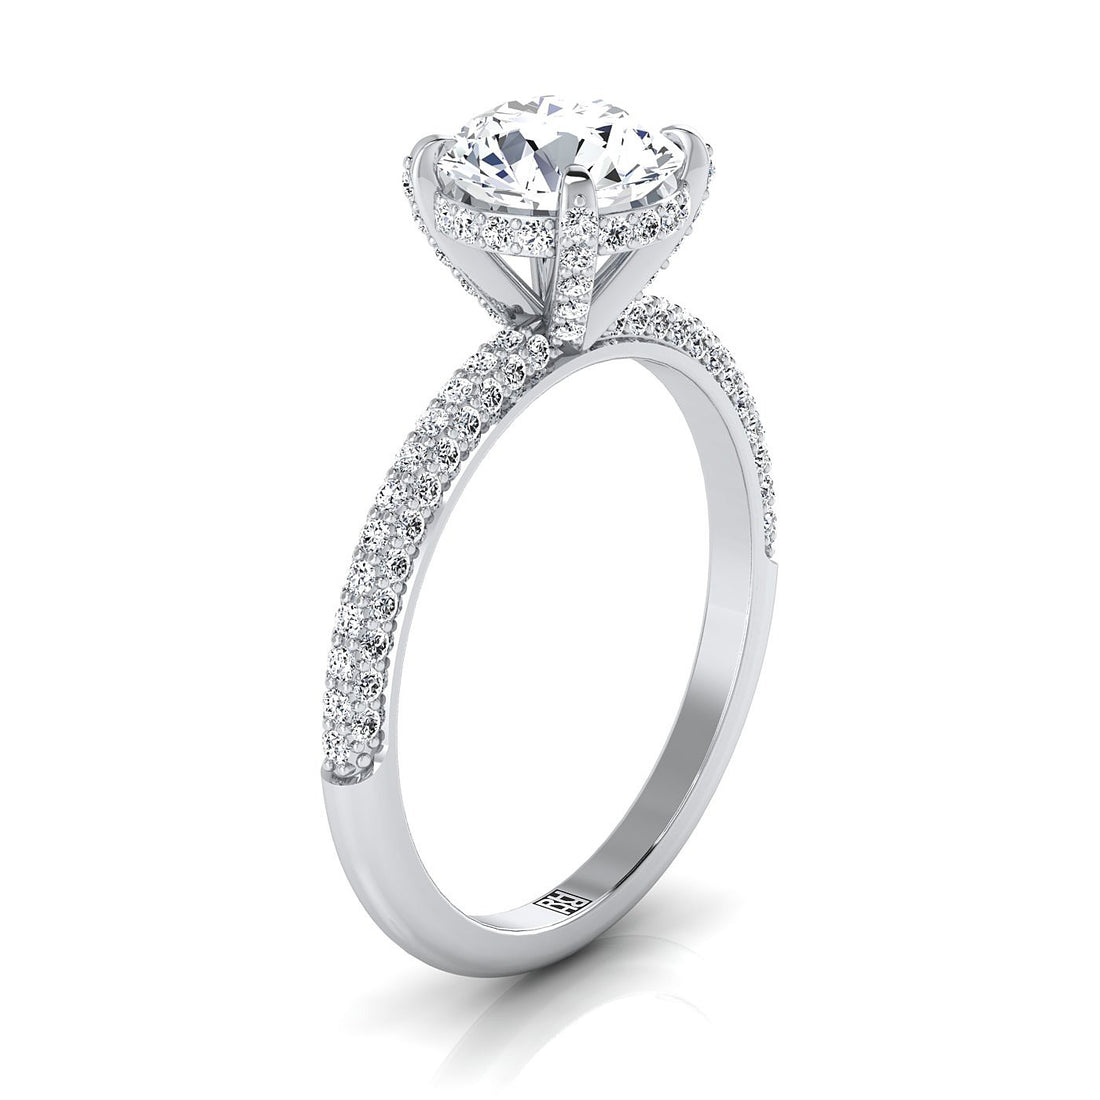 Tips for Purchasing a Cheap Diamond Engagement Ring